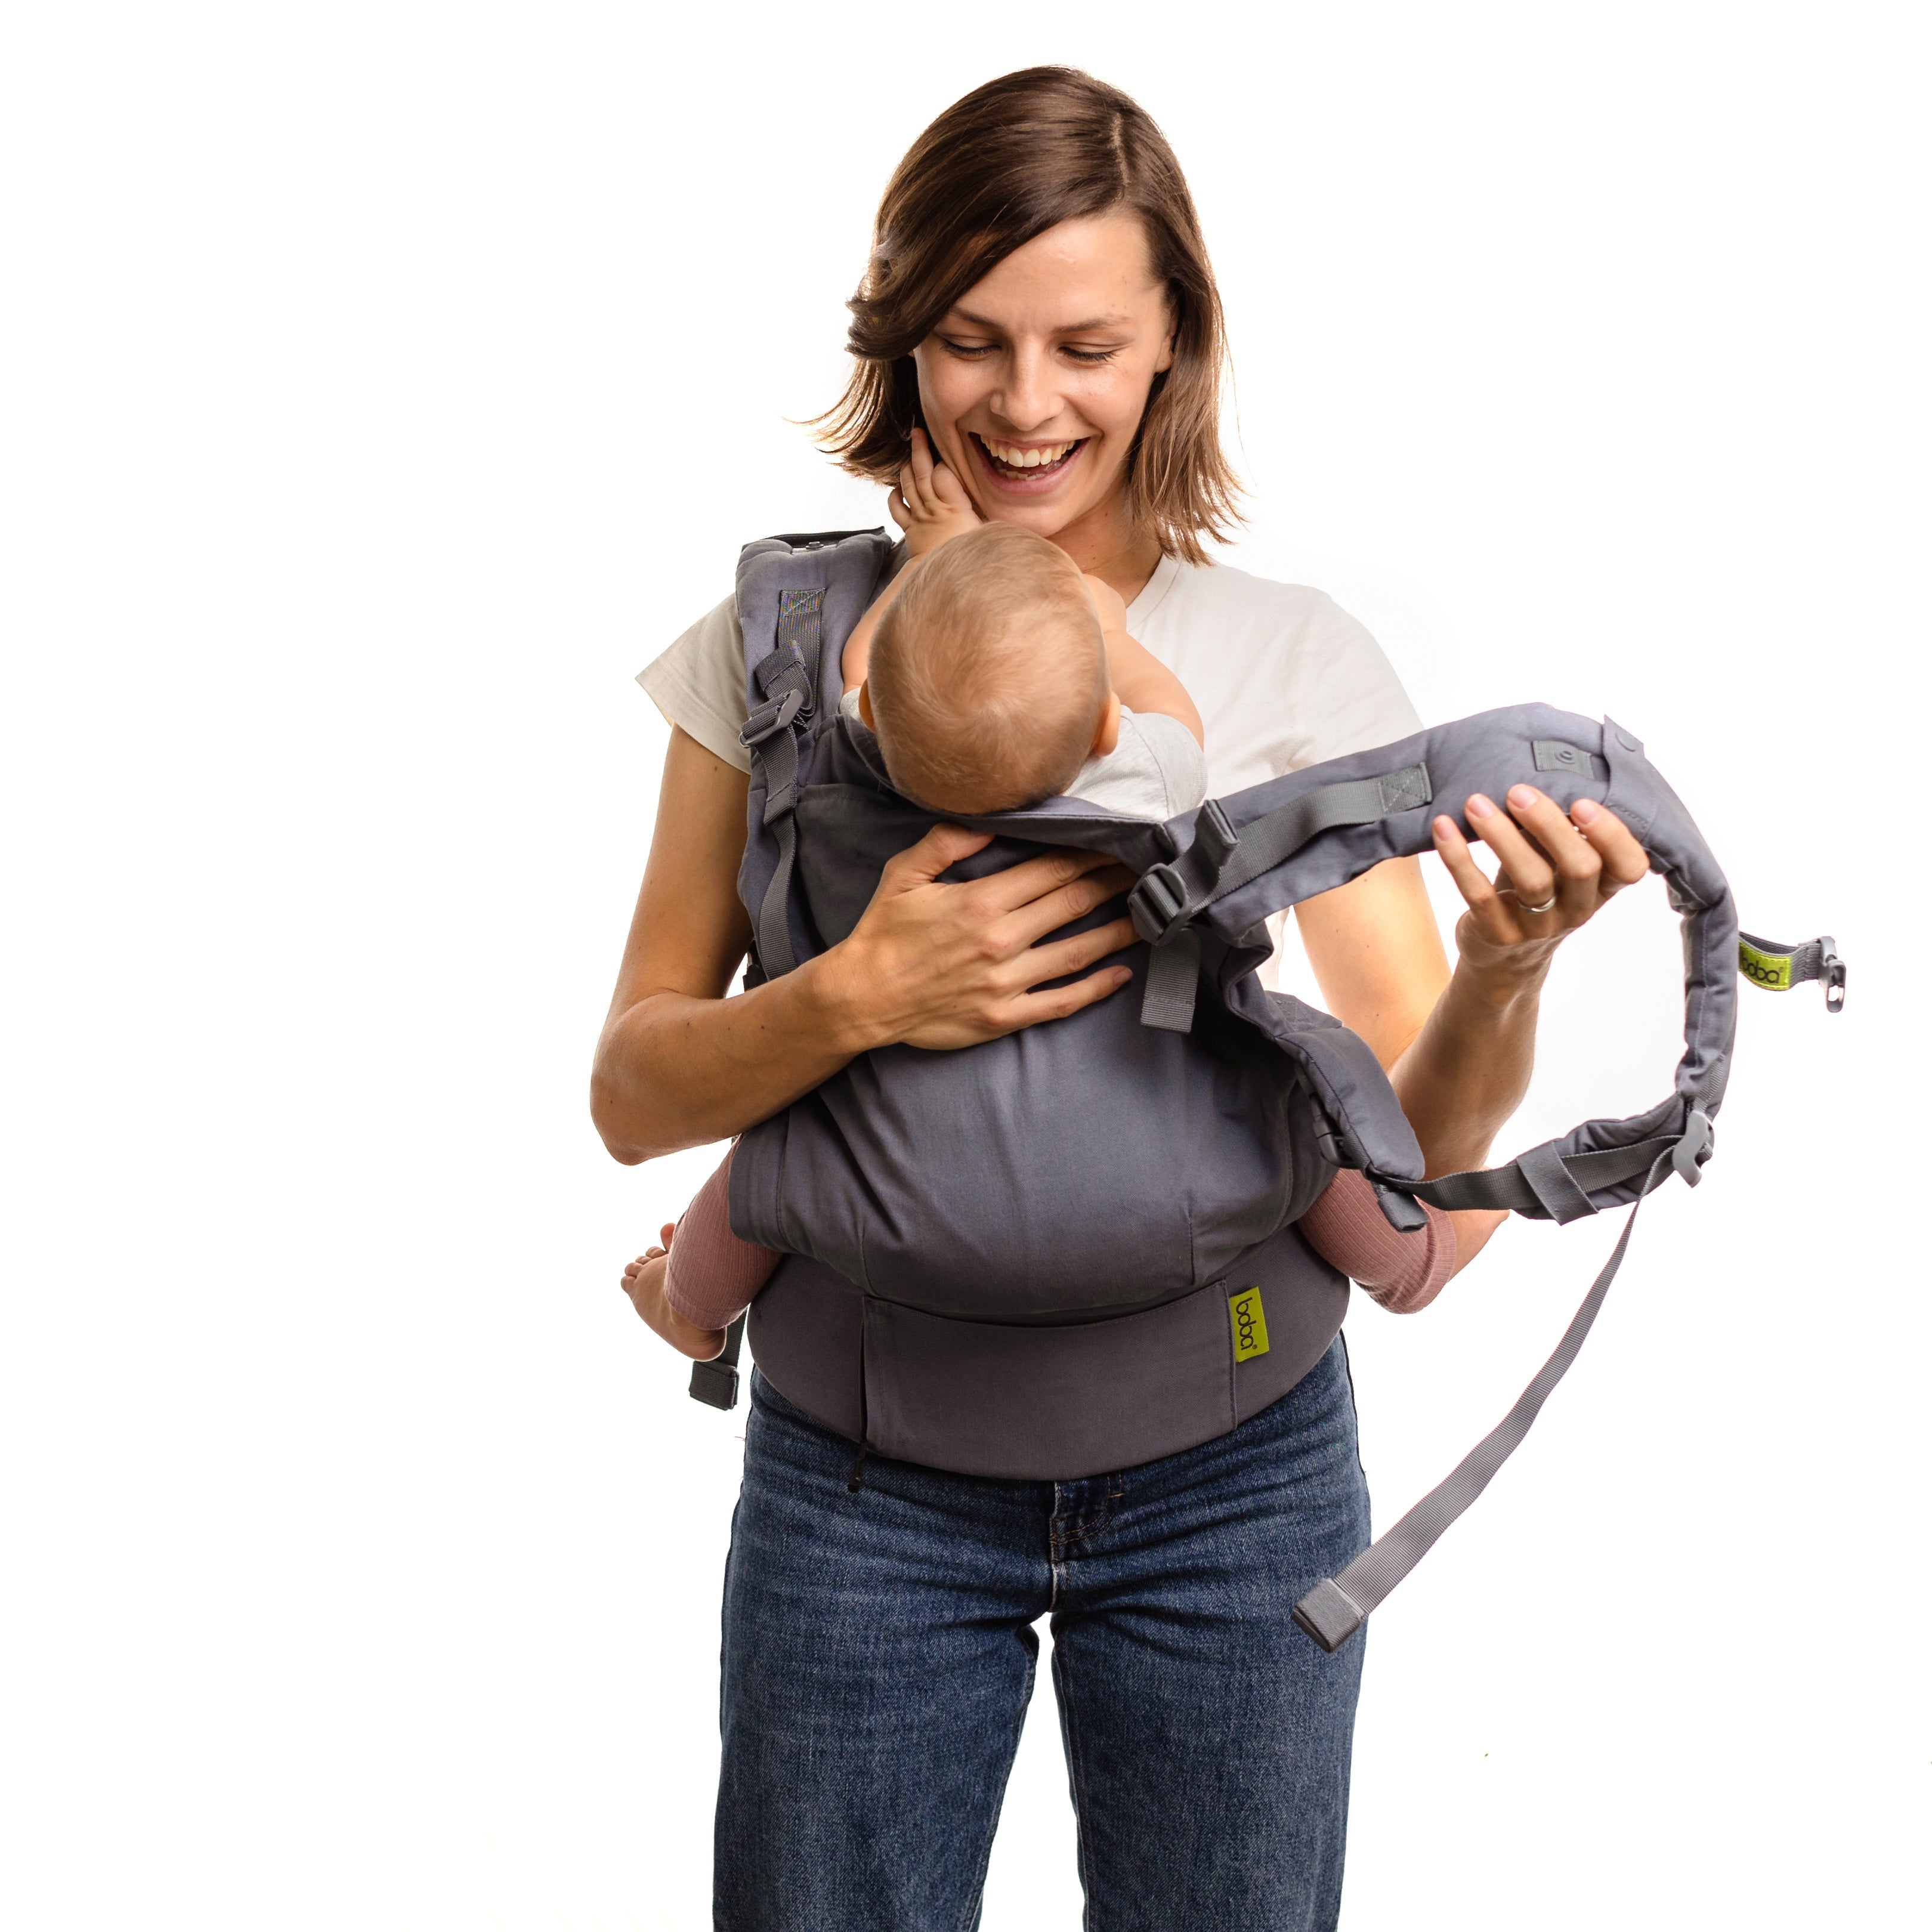 Happy young confident new mom is putting on the boba x gray carrier. She will wear her baby girl in the ergonomic front carry.